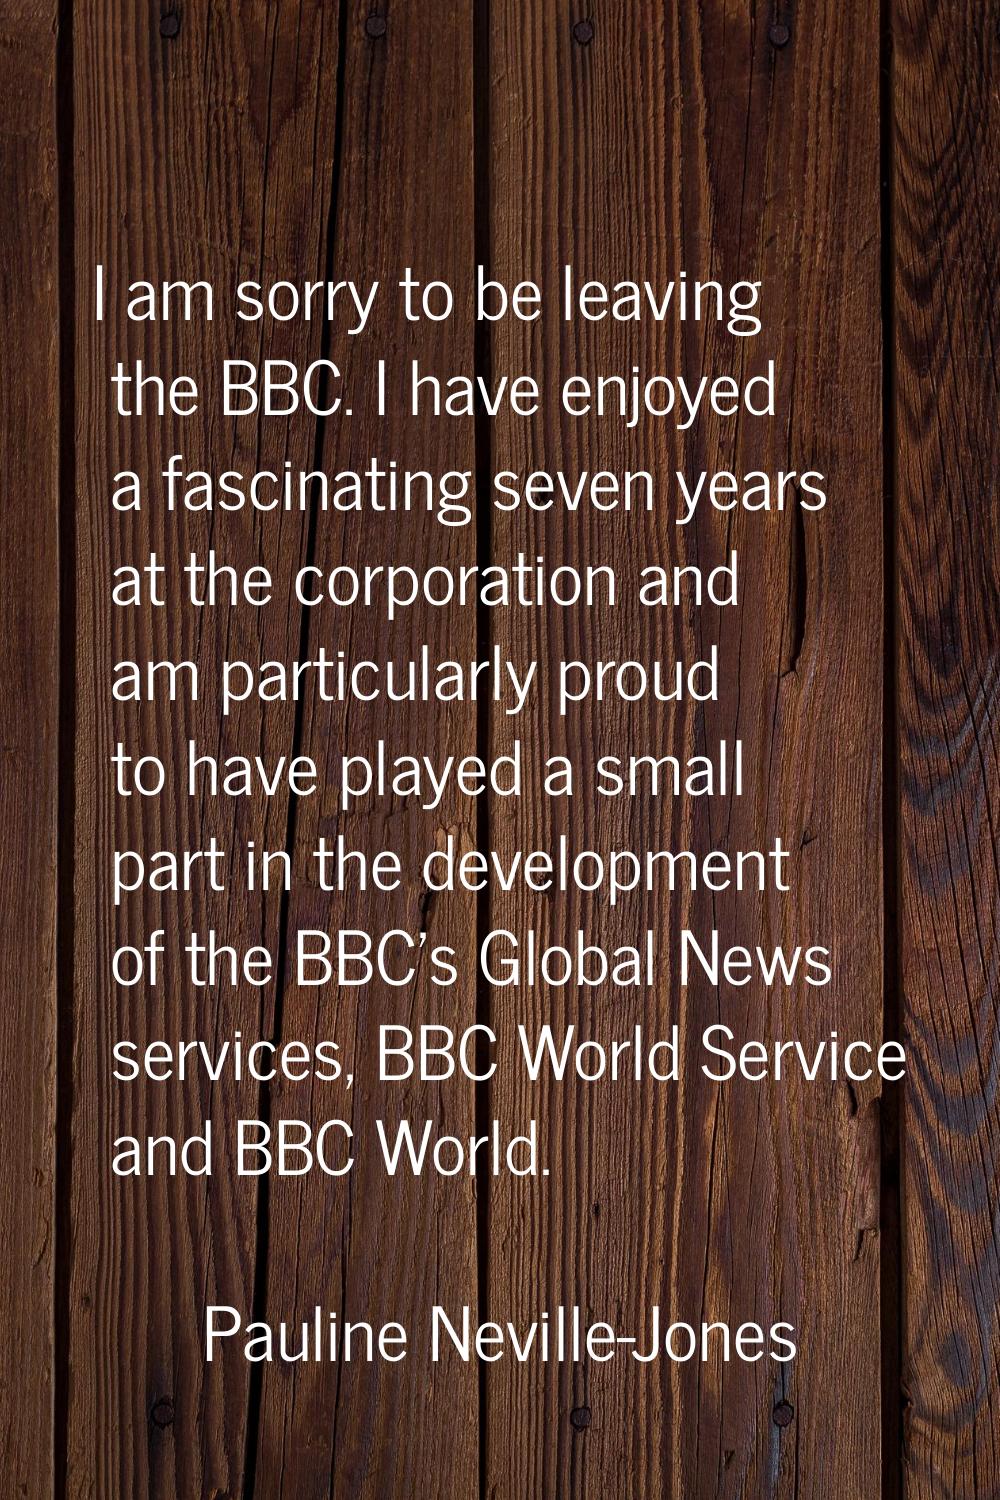 I am sorry to be leaving the BBC. I have enjoyed a fascinating seven years at the corporation and a